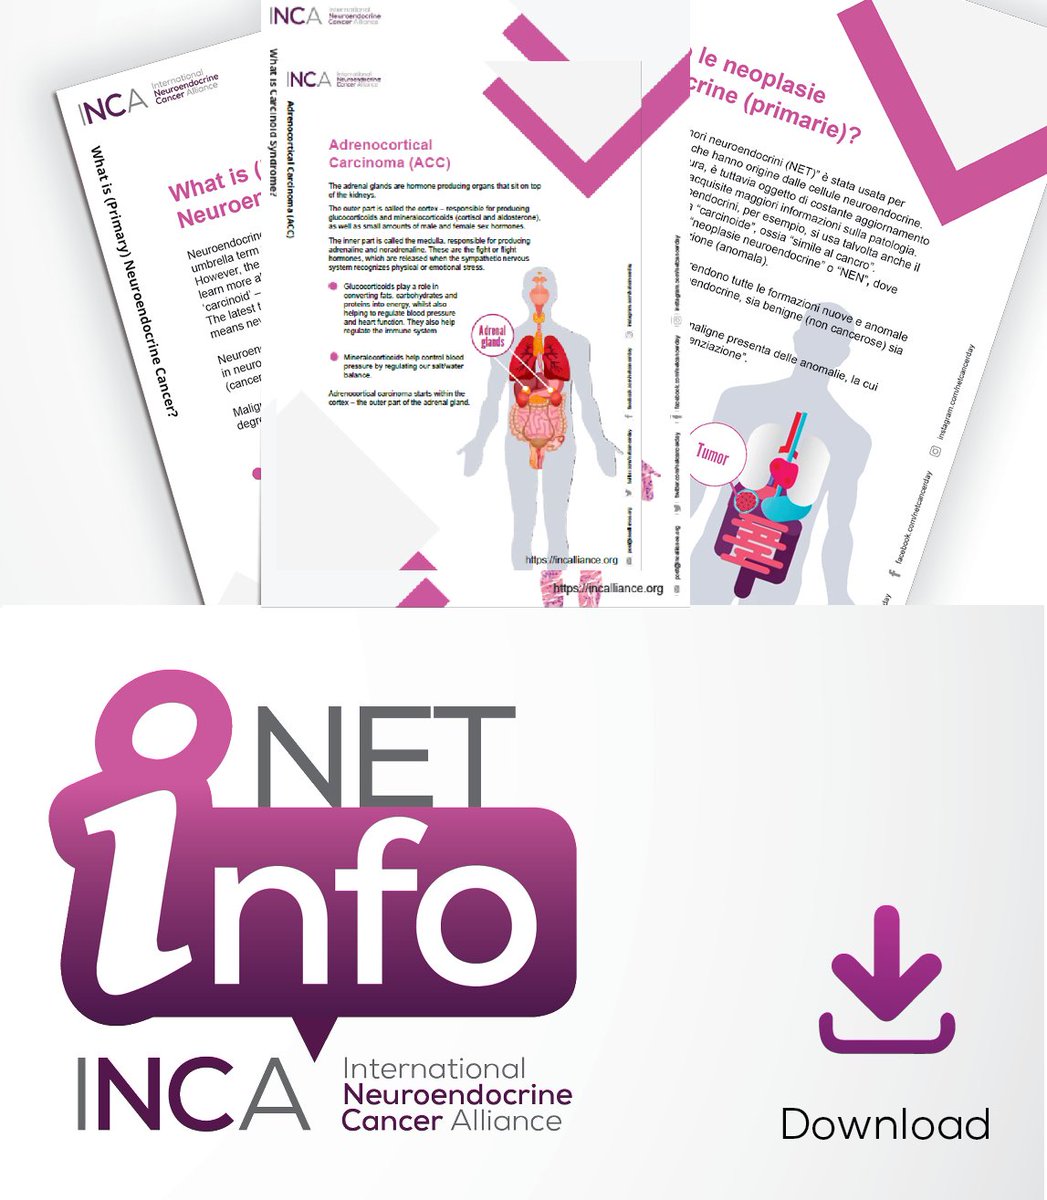 #AdrenocorticalCarcinoma (#ACC) can present with symptoms like muscle weakness, weight gain, reduced immunity, etc. ✅Let’s support HCPs to know more about ACC with #NETInfo in 11 languages: incalliance.org/net-info-packs/ #LetsTalkAboutNETs #EndoTwitter #MedEd #MedTwitter